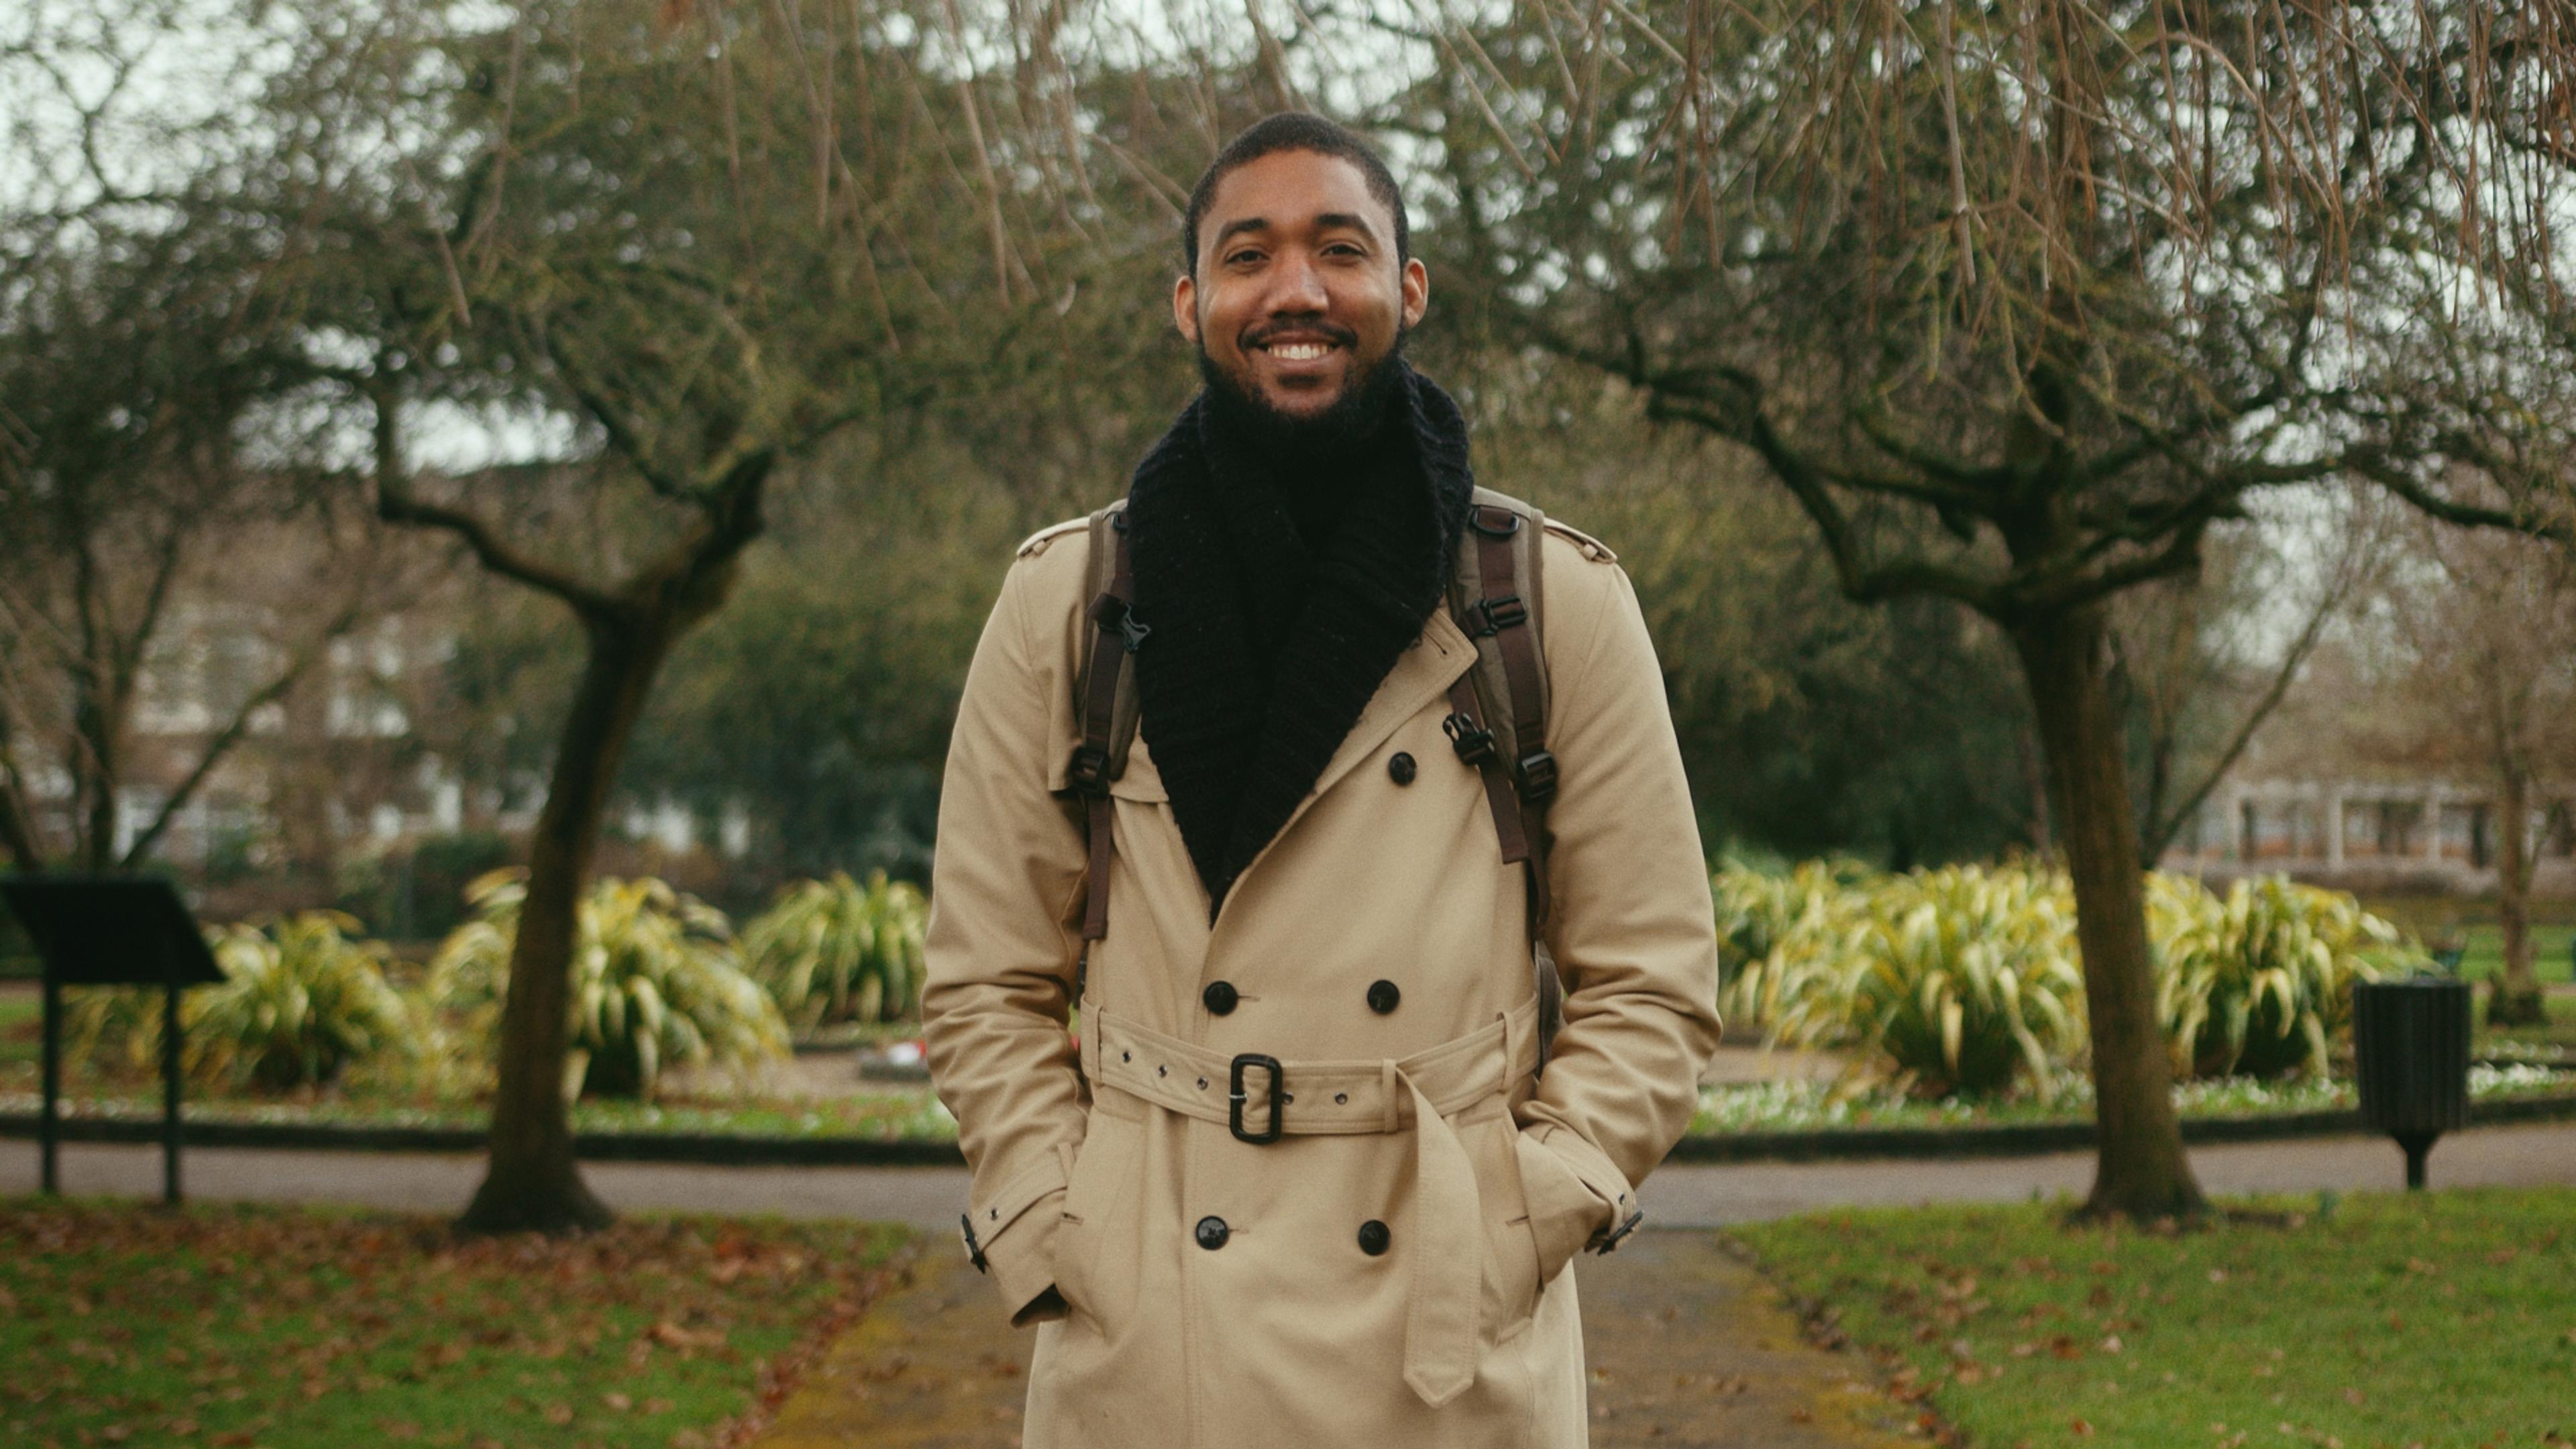 Diversity in Sales: a quick Q&A with Sales Team Lead, Davion Lawrence